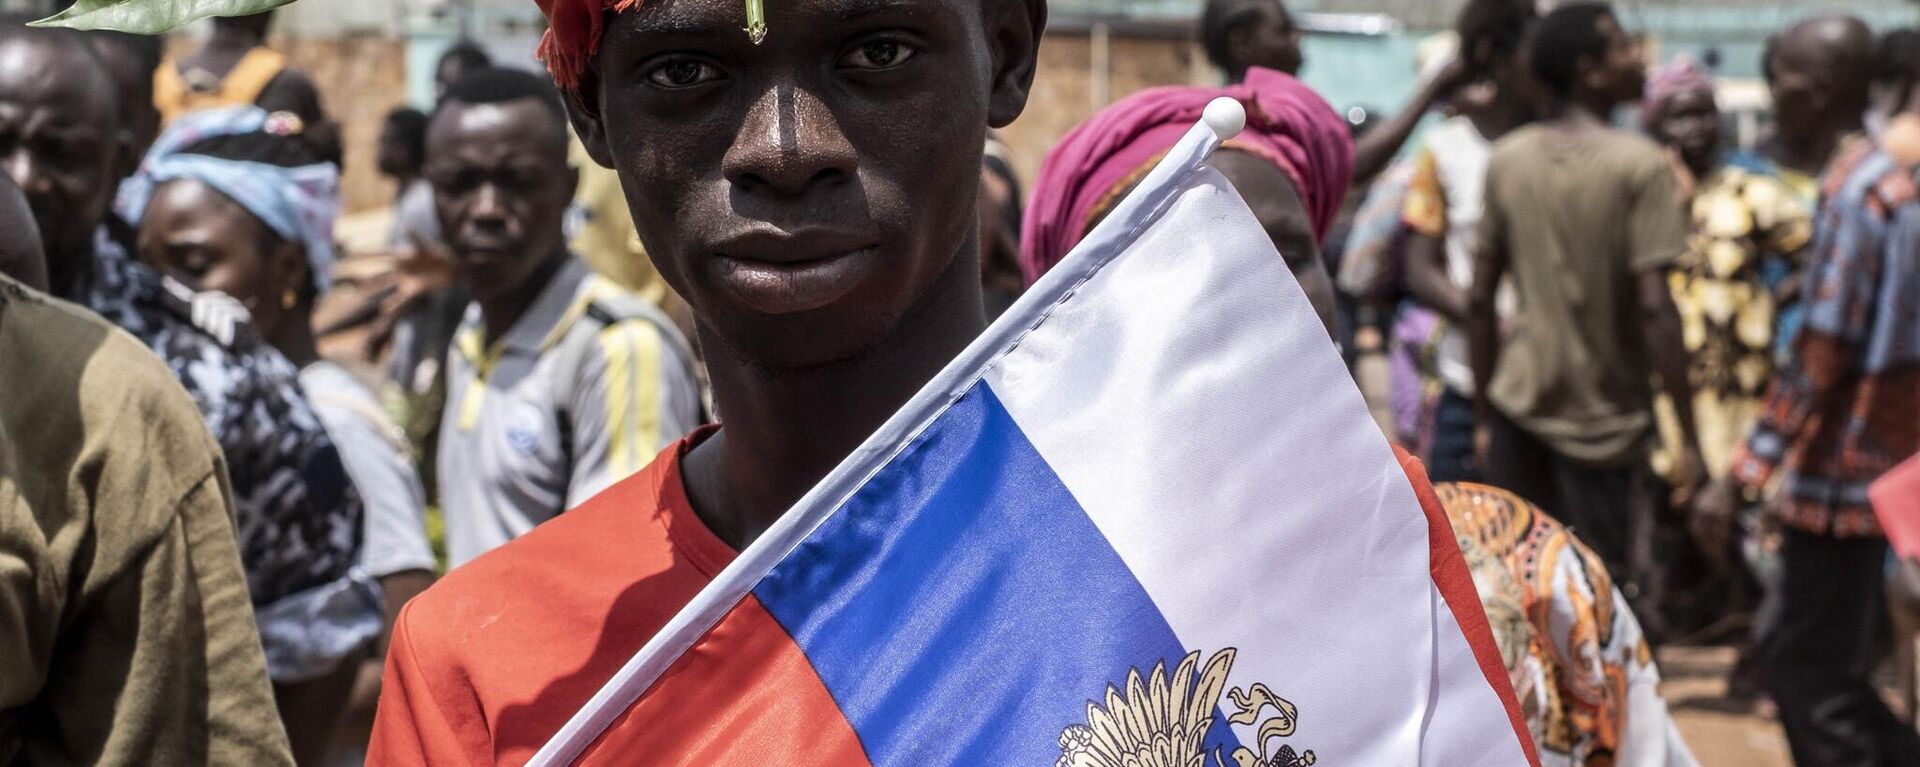 A demonstrator with foliage on to his head, a sign of compassion in Central African Republic, holds a Russian flag with the emblem of Russia on while posing for a portrait in Bangui, on March 22, 2023 during a march in support of Russia and China's presence in the Central African Republic - Sputnik Africa, 1920, 28.06.2023